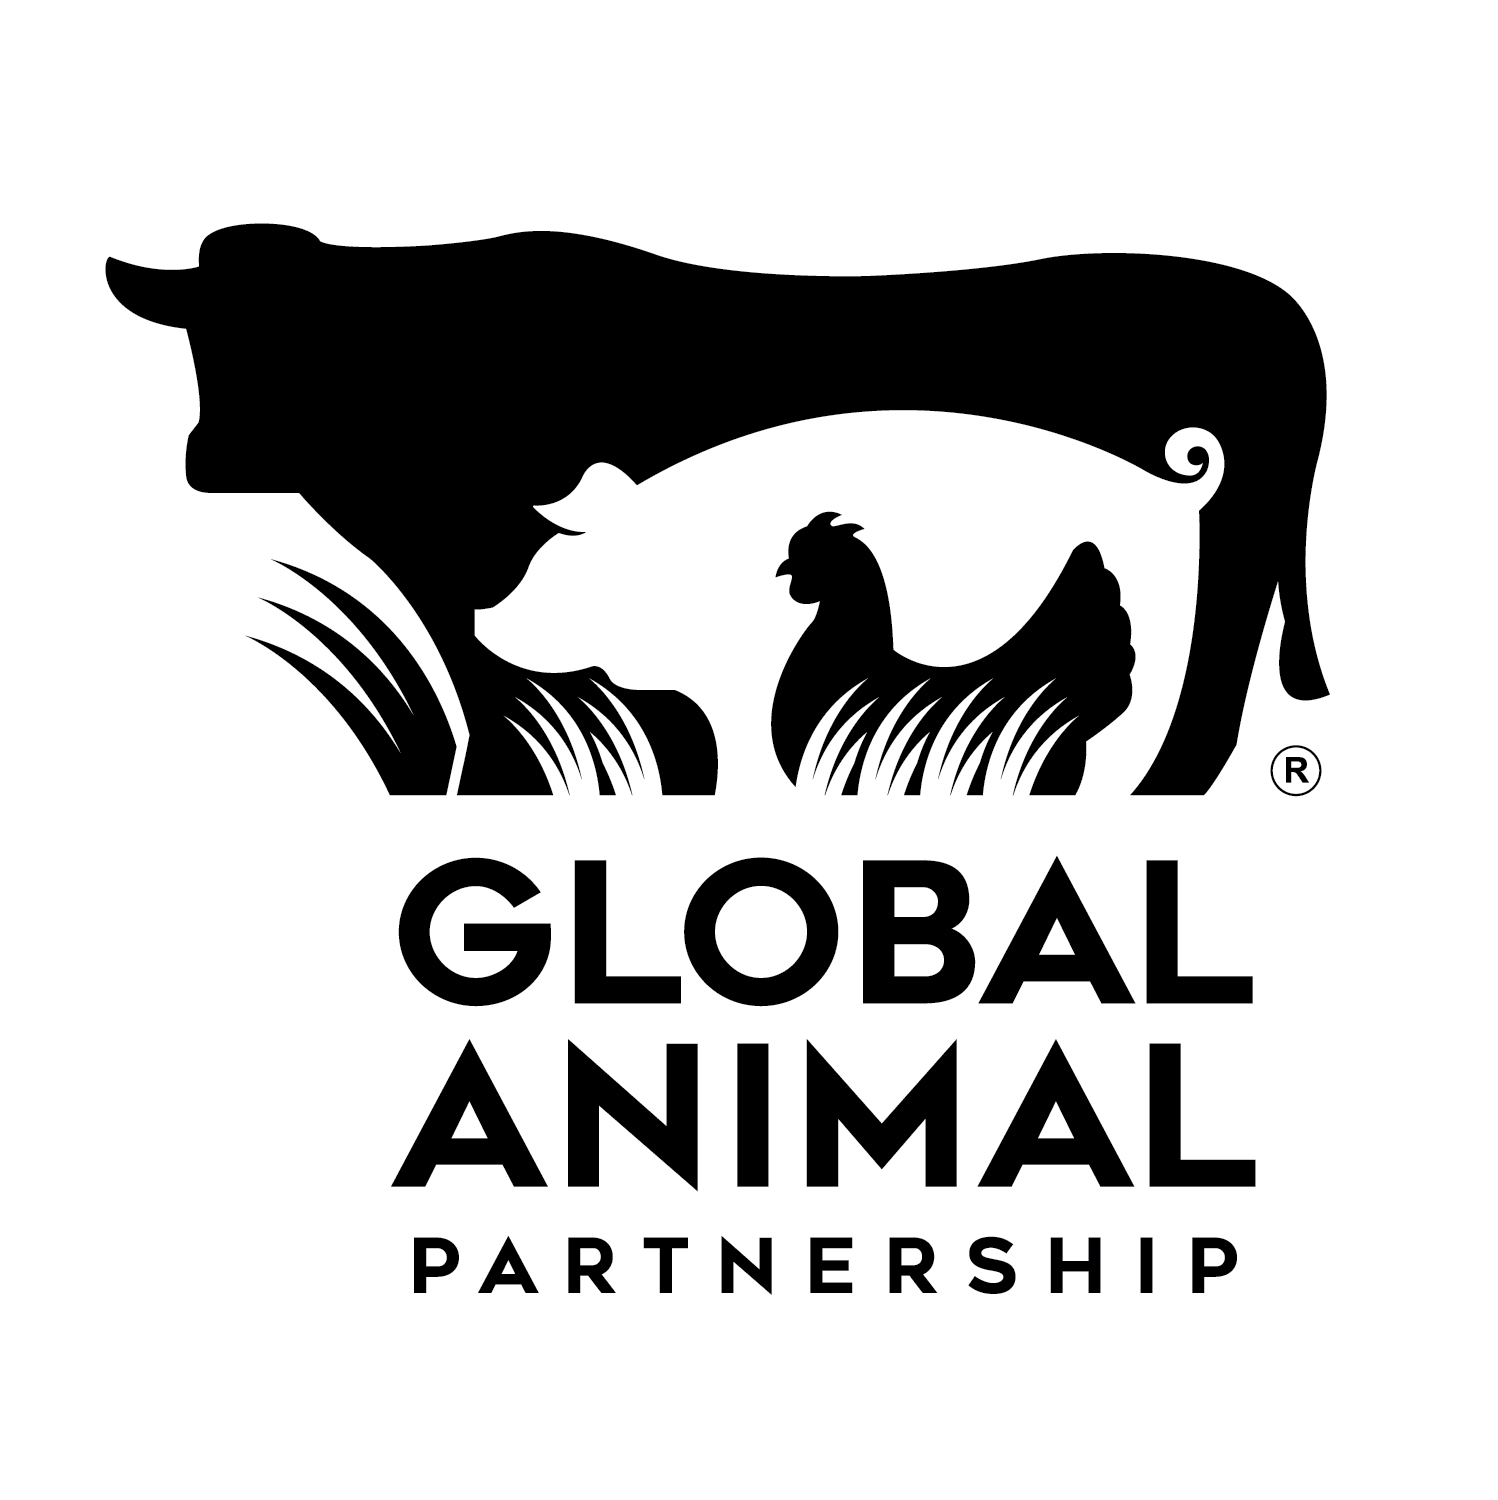 G.A.P.’s mission is to drive meaningful, continuous improvement of farm animal welfare through multi-level standards development, application, and verification across the supply chain.